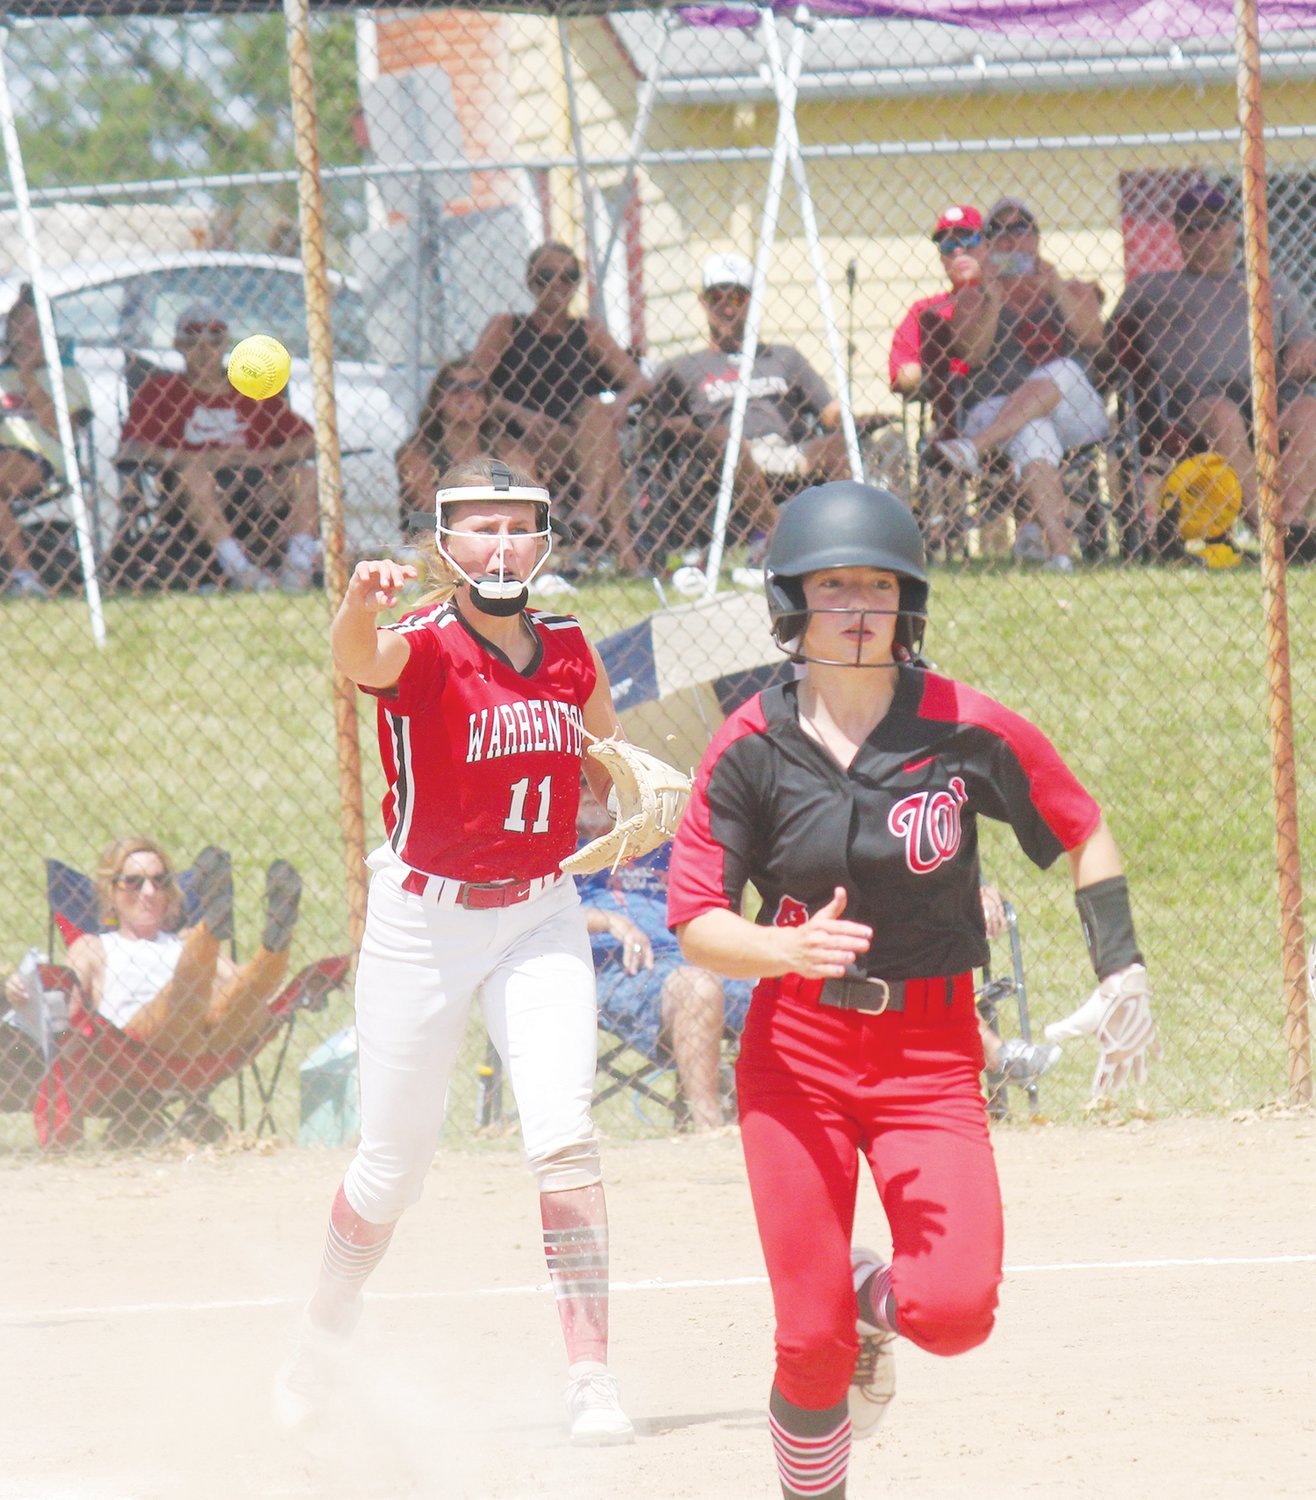 OPENING TOURNEY — Warrenton first baseman Kaylin Haas (11) throws to first base to retire a Winfield batter in Saturday’s action at the Troy Buchanan Tournament.